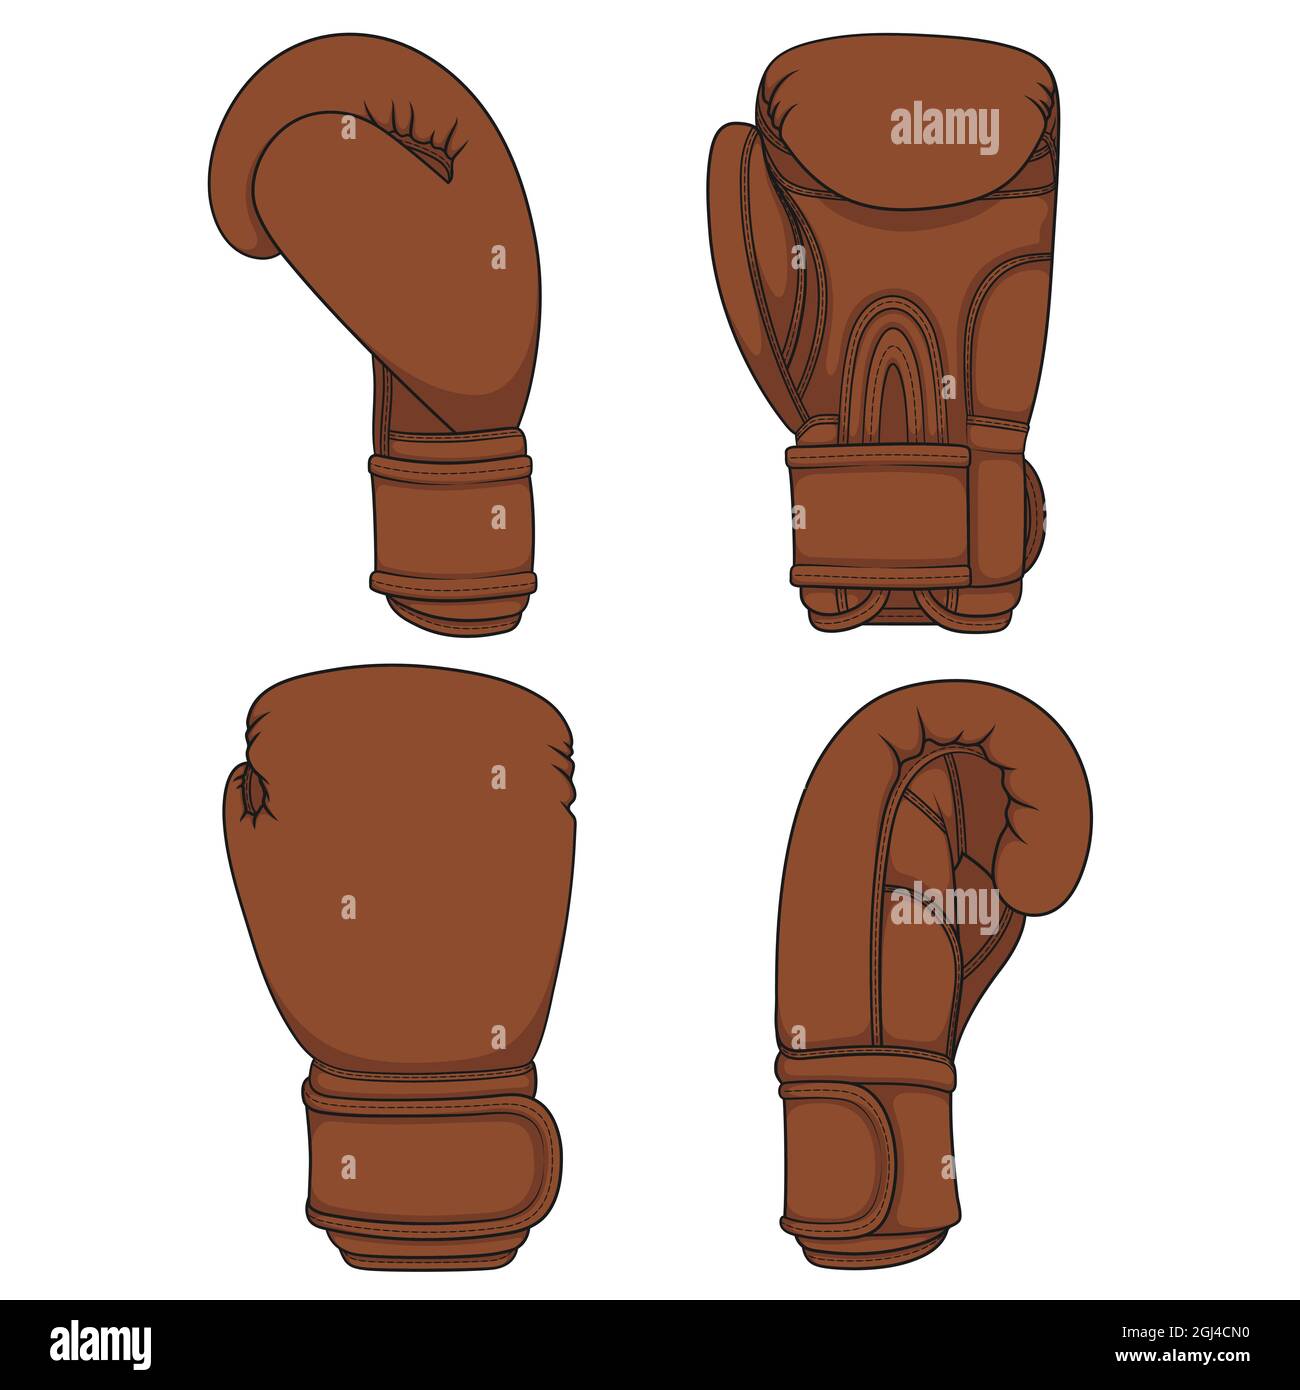 Set of illustrations with brown leather boxing gloves. Isolated vector objects on white. Stock Vector